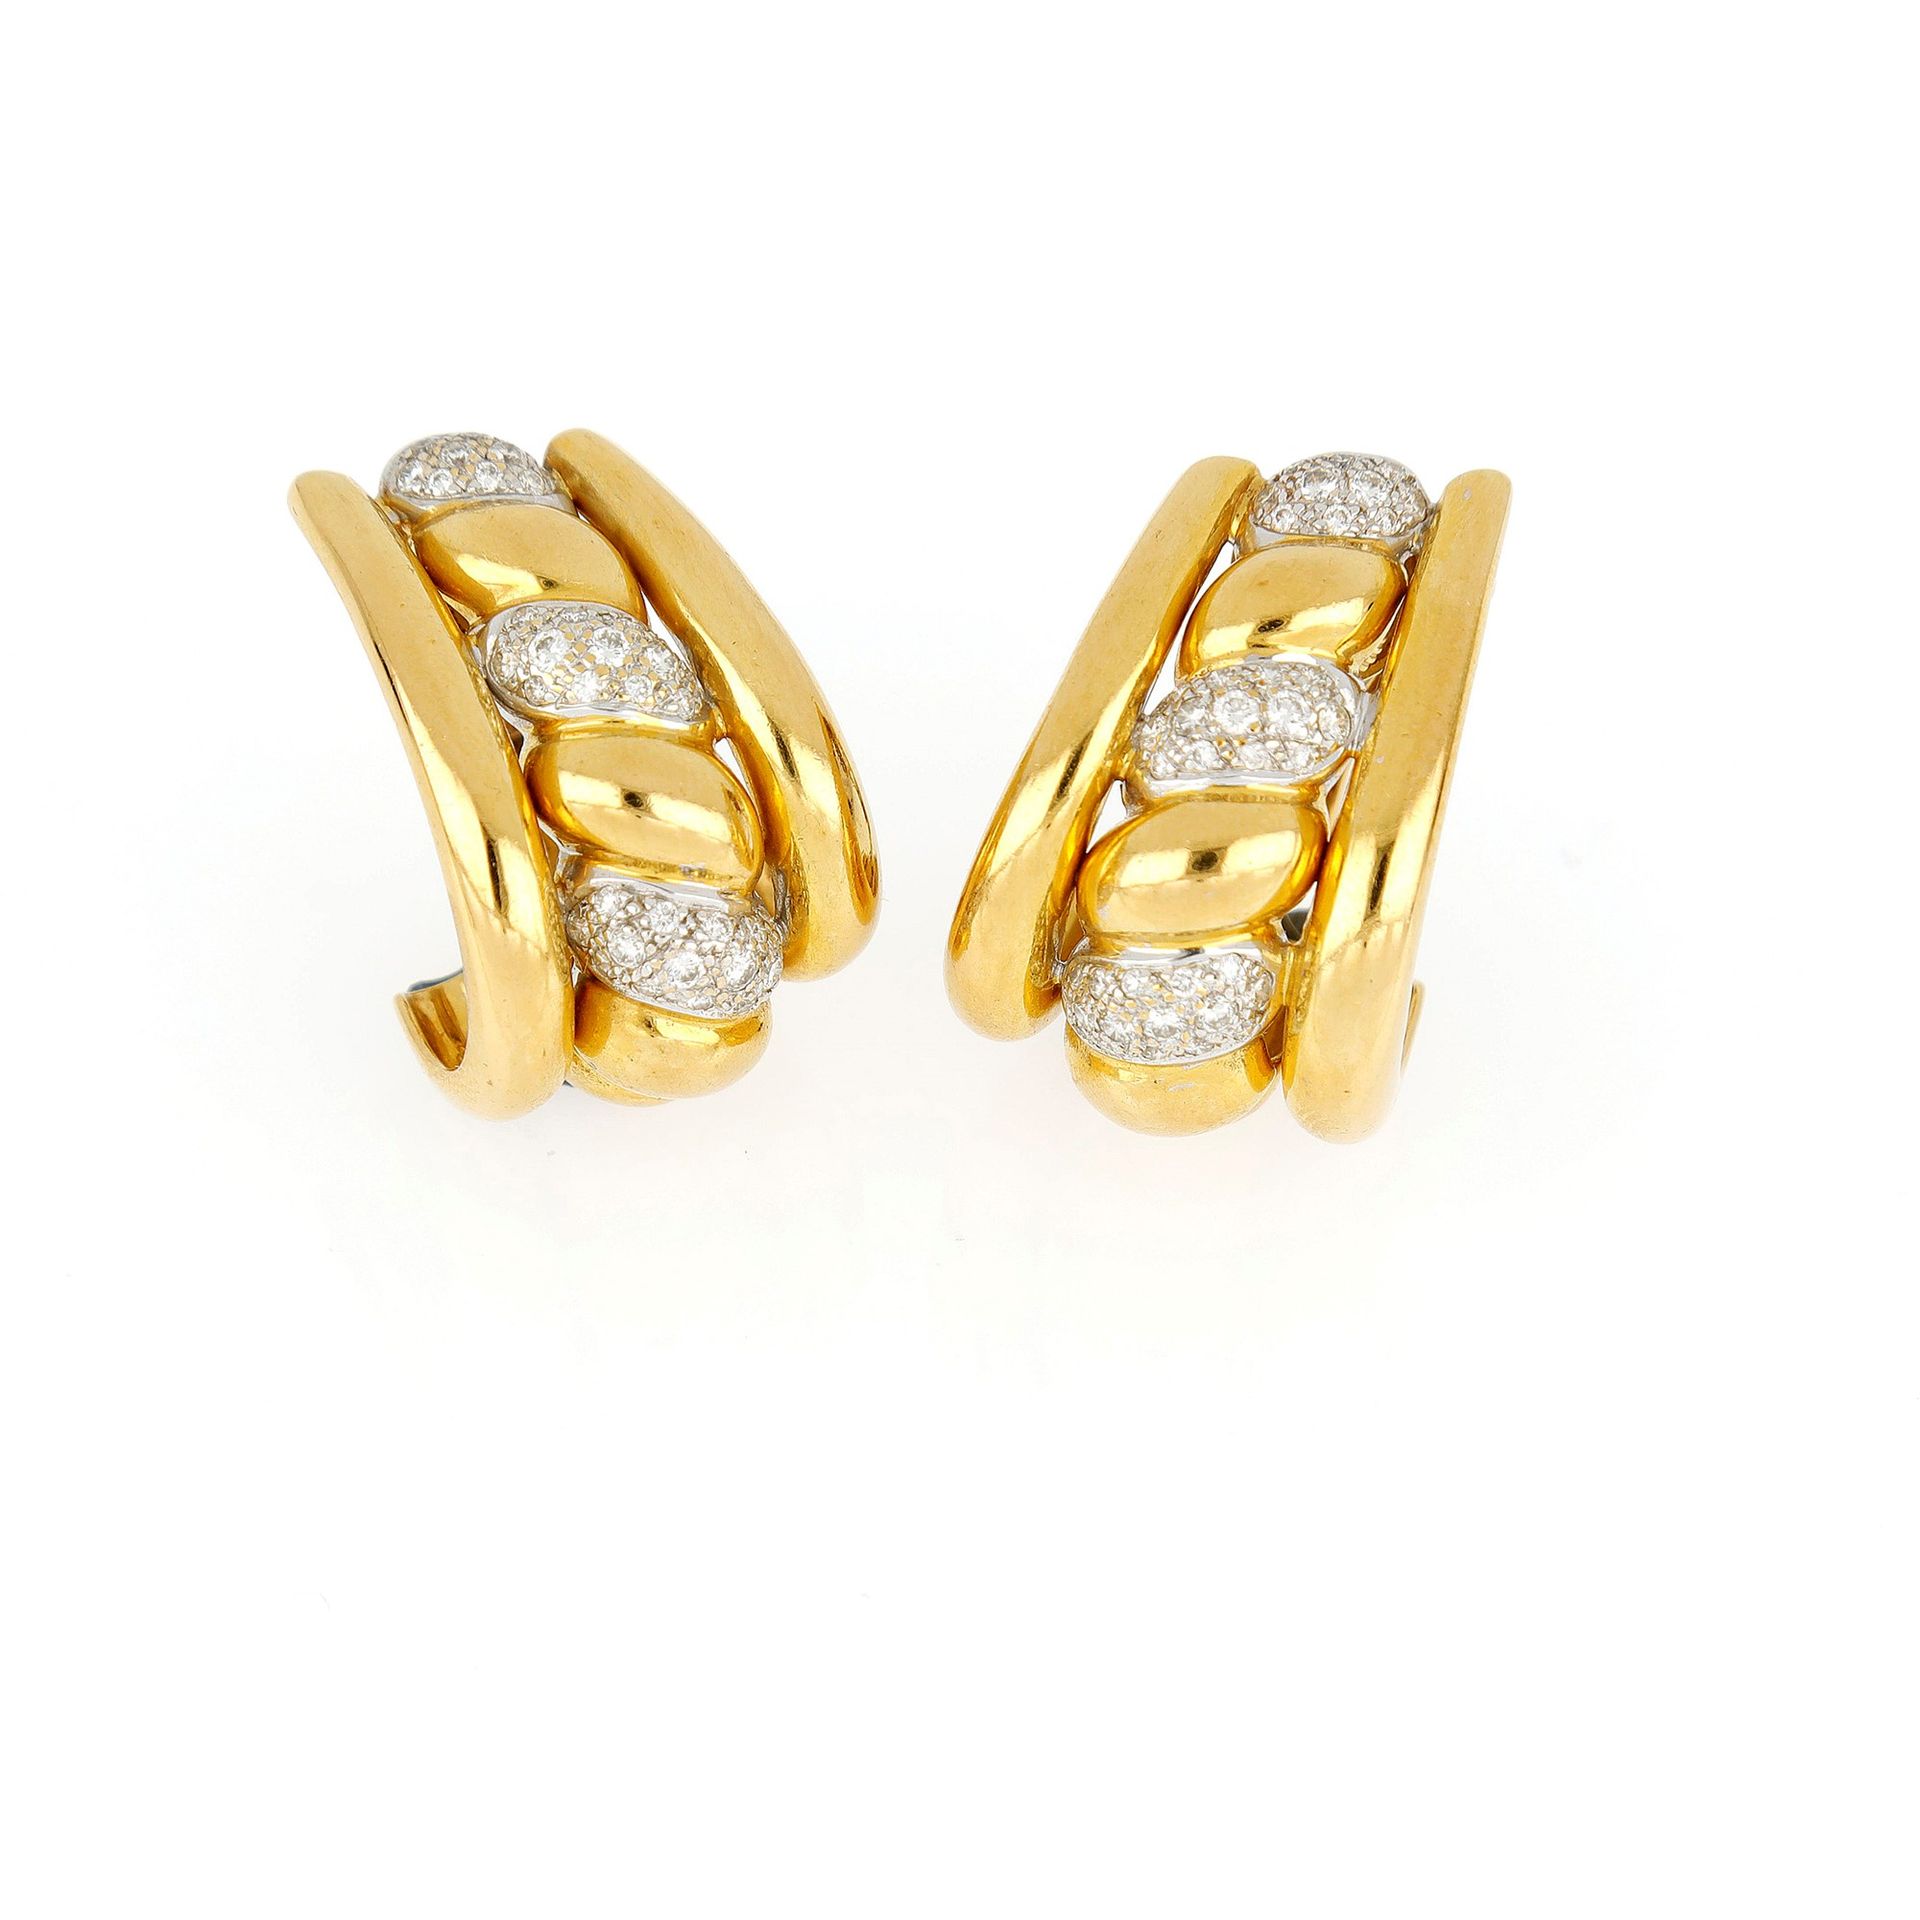 SABBADINI Sabbadini clip earrings in 18 kt yellow and white gold with round bril&hellip;